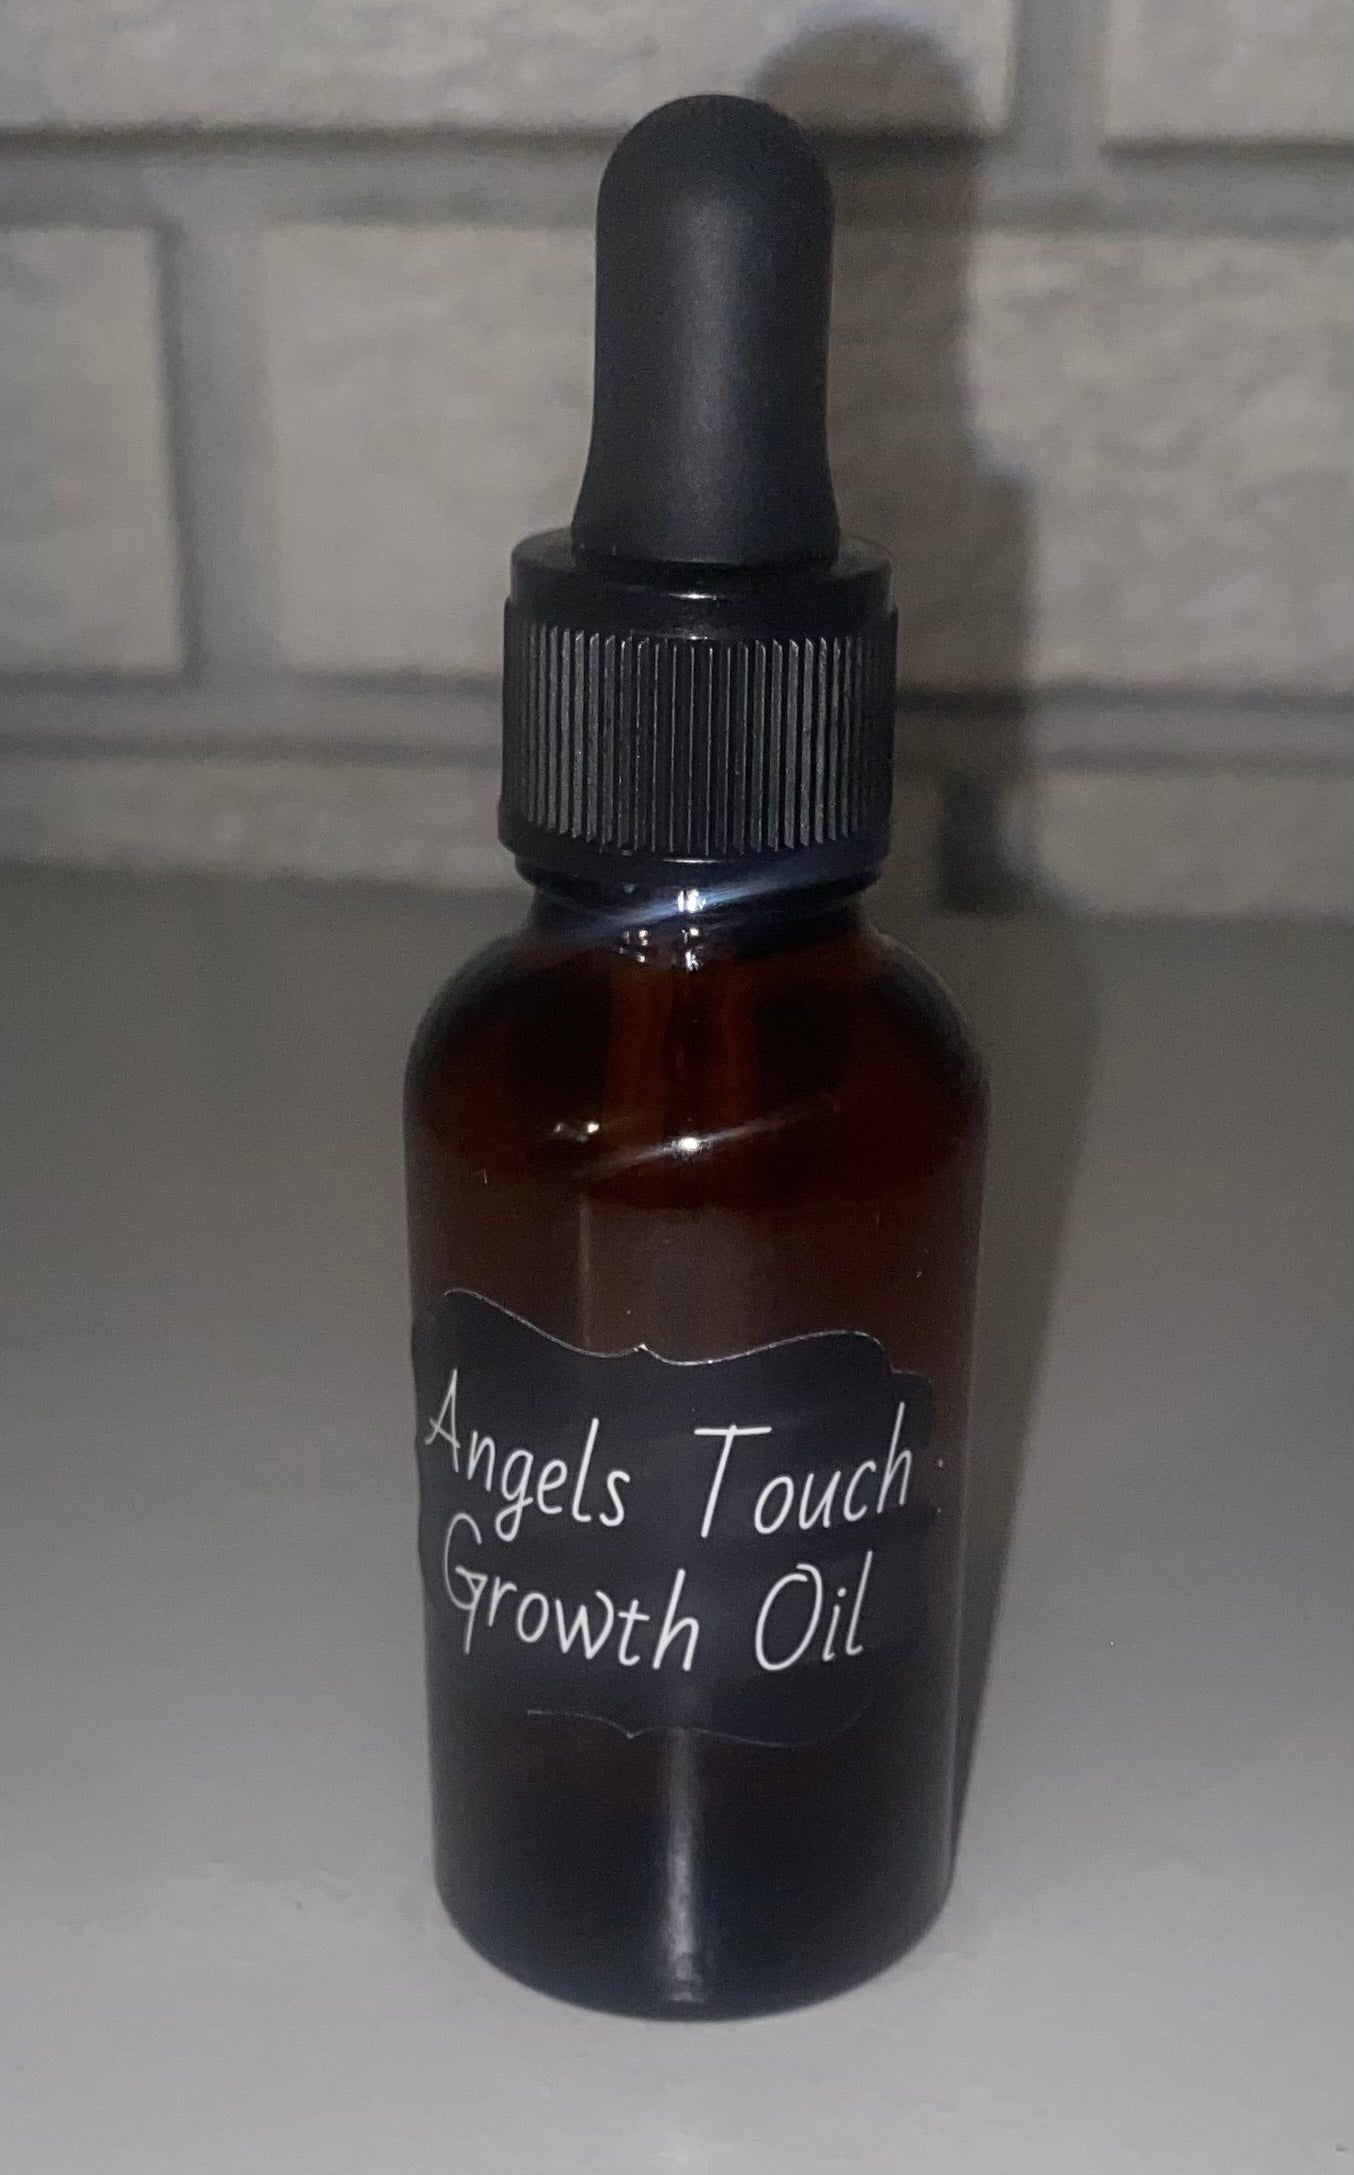 Angels Touch Hair Growth oil